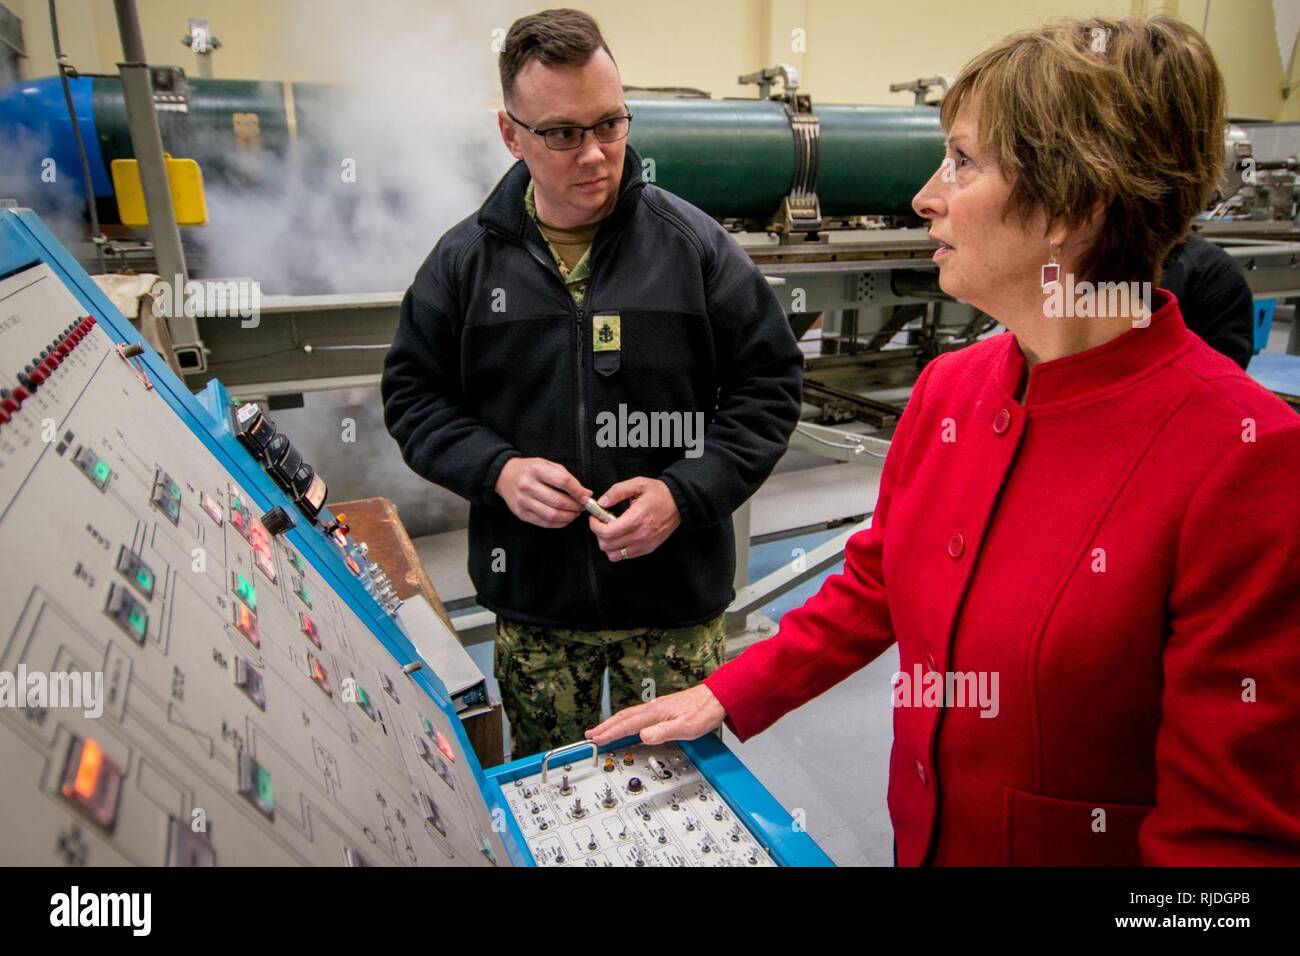 BANGOR, Wash. (Jan. 18, 2018) - Chief Petty Officer Machinist's Mate (SS) John Livingston, assigned to the Trident Training Facility(TTF), shows Mrs. Laura Hyten, wife of Gen. John Hyten, commander of U.S. Strategic Command, how to test equipment in the torpedo lab at the TTF at Naval Base Kitsap-Bangor, Wash., Jan. 18, 2018. Gen. and Mrs. Hyten visited staff and facilities assigned to Commander Submarine Group 9 at Naval Base Kitsap-Bangor to see the operations of one leg of the nuclear triad. Stock Photo